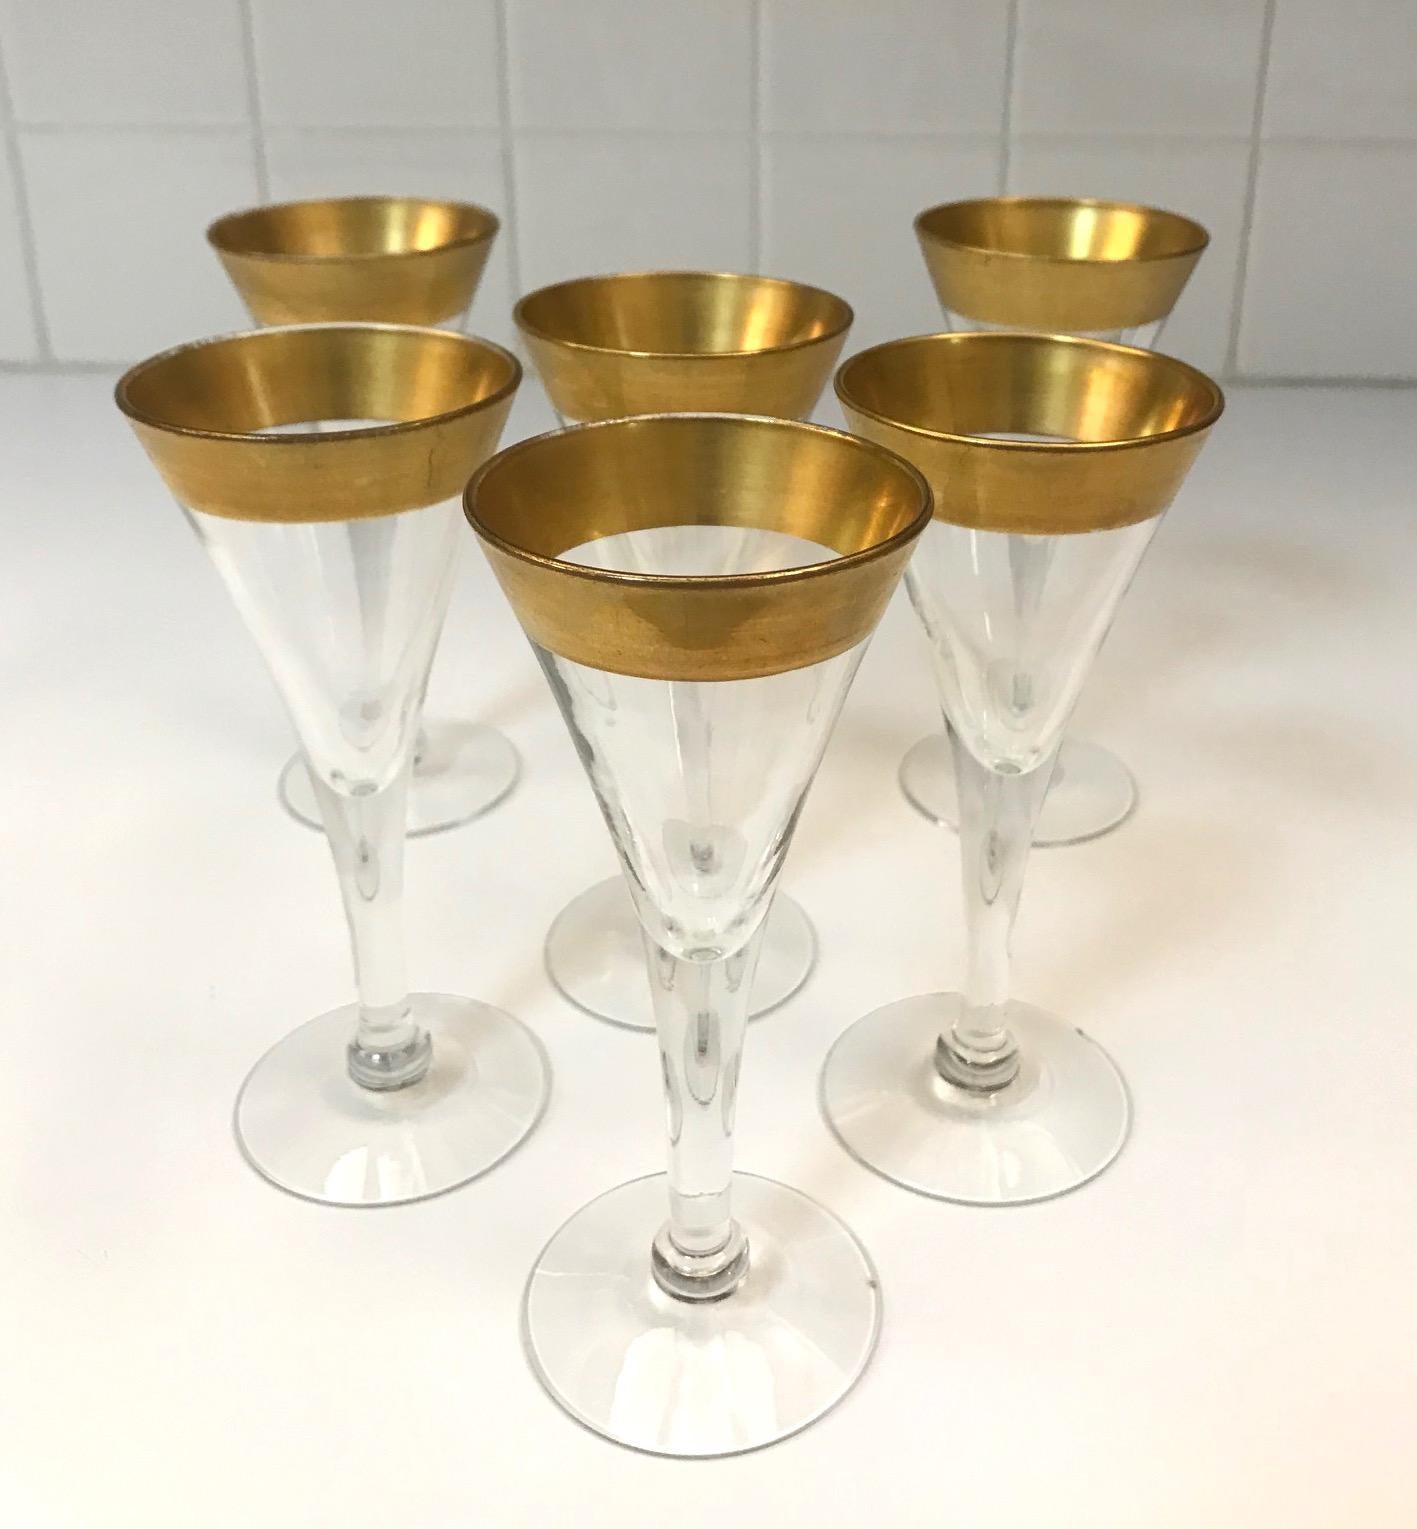 Set of six elegant barware glasses for cordials by iconic midcentury designer Dorothy Thorpe. Rare set features hand blown glass with tapered stems in the form of petite goblets, and with 24-karat gold trim accents. Makes a chic and elegant addition